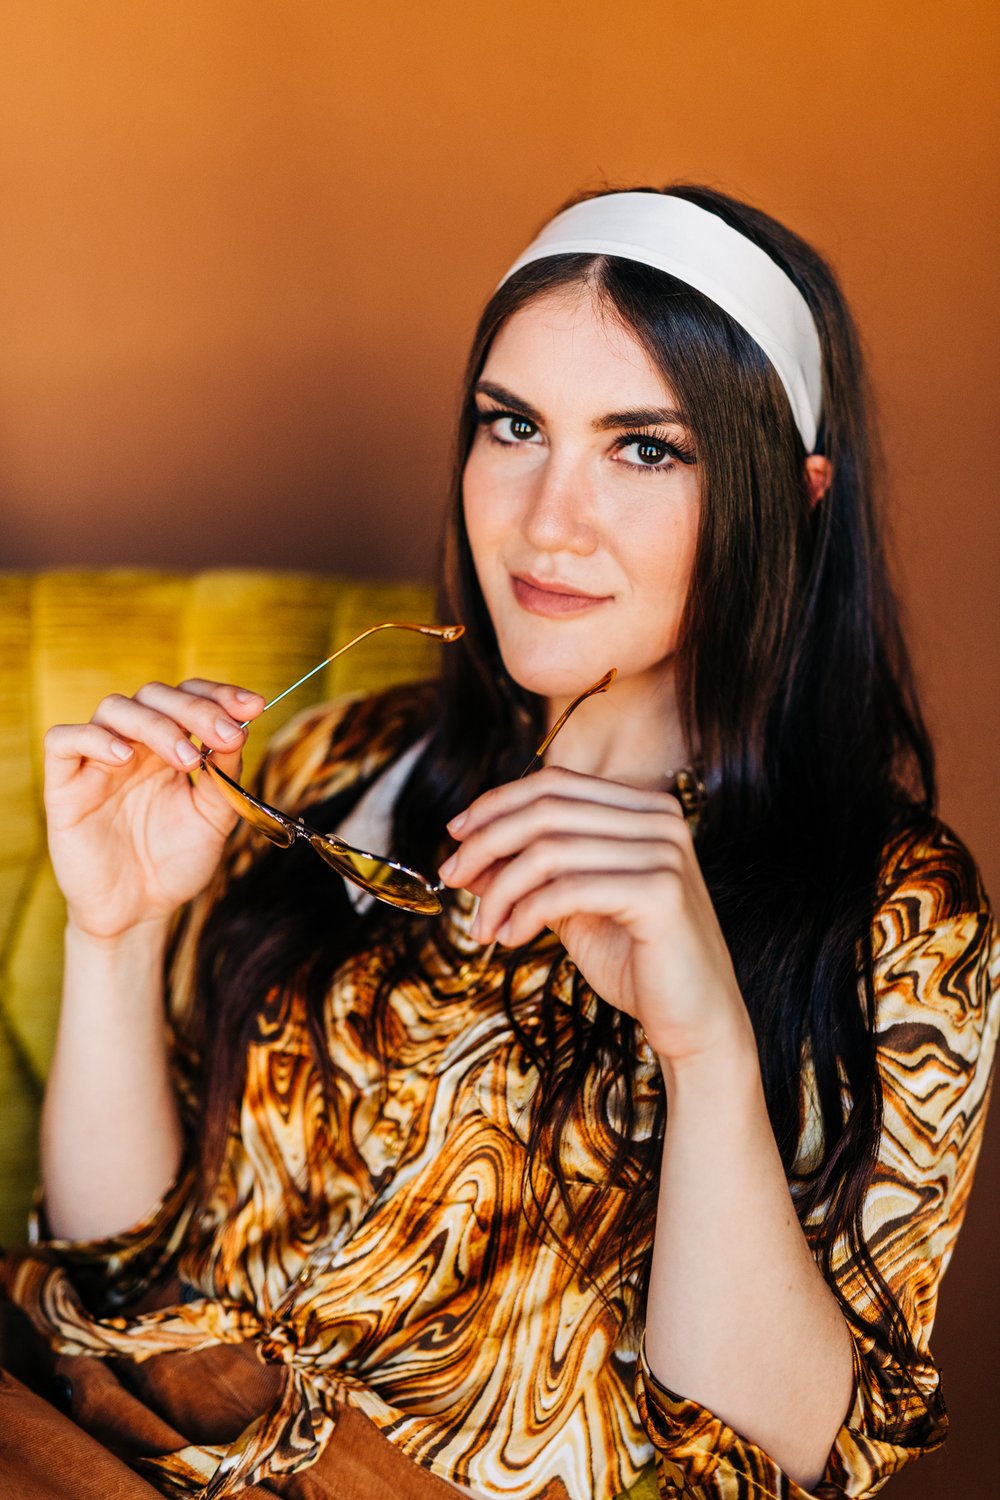 70s inspired creative editorial photoshoot at the suite on federal in downtown youngstown ohio photographed by youngstown wedding photographer mae b photo youngstown family photographer mae b photo-15.jpg